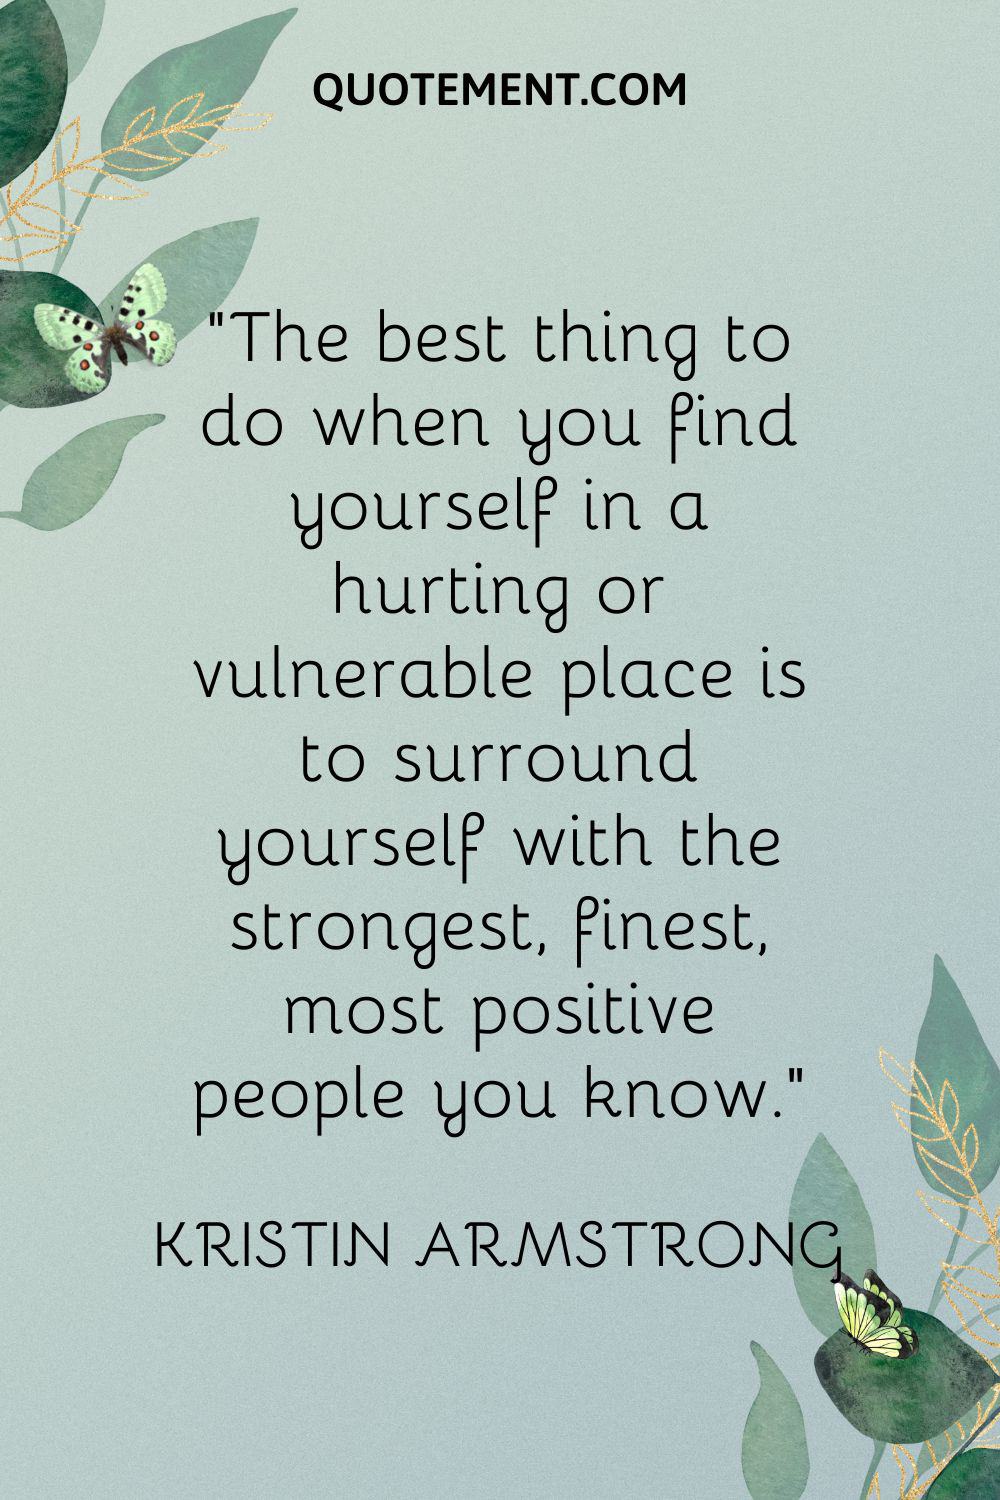 The best thing to do when you find yourself in a hurting or vulnerable place is to surround yourself with the strongest, finest, most positive people you know